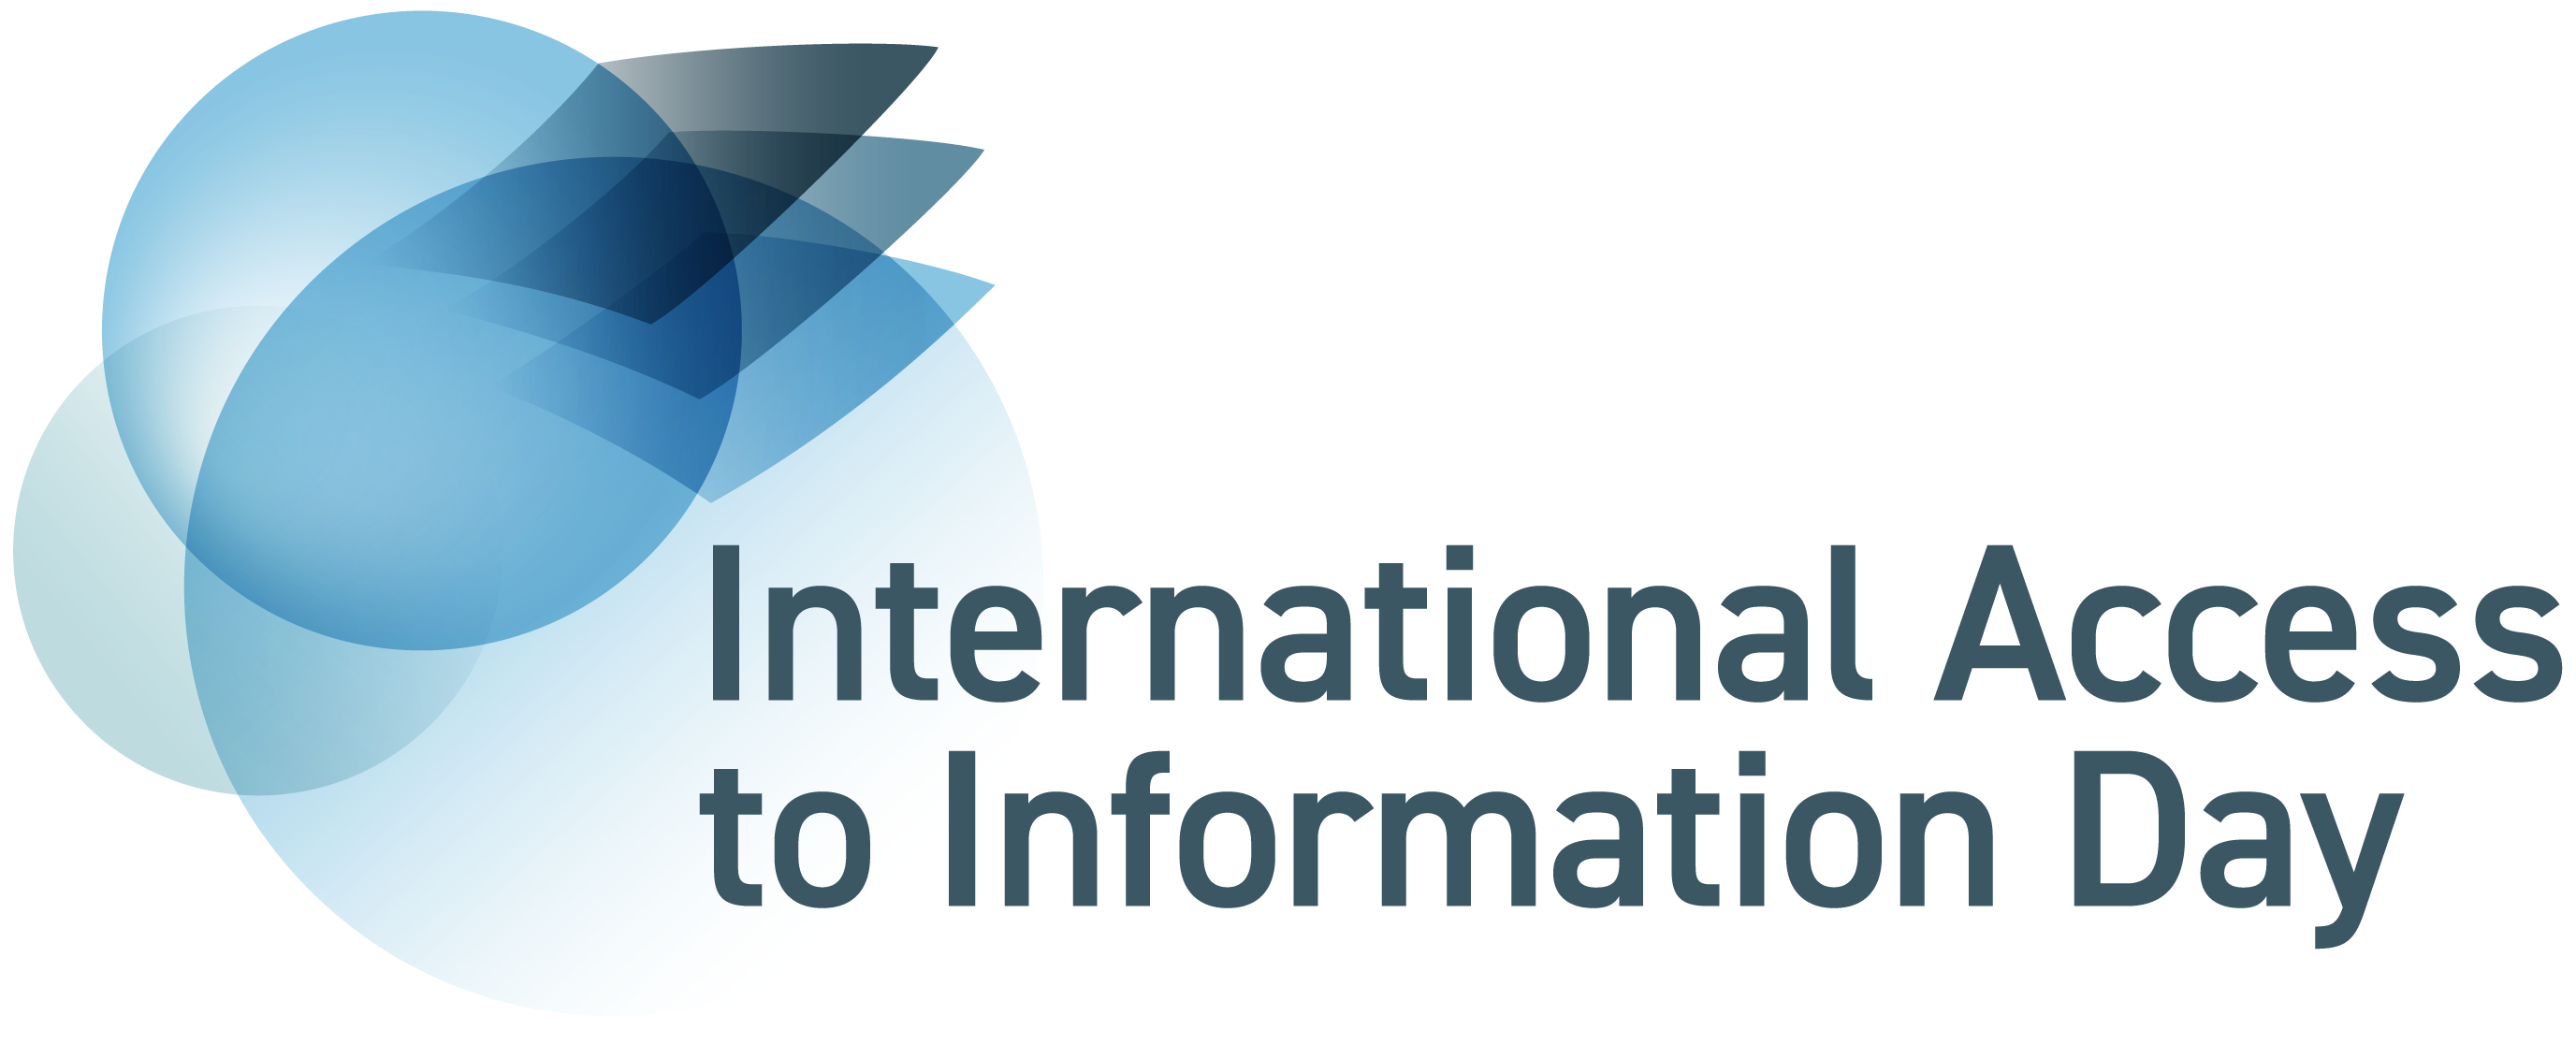 International Access to Information Day Logo